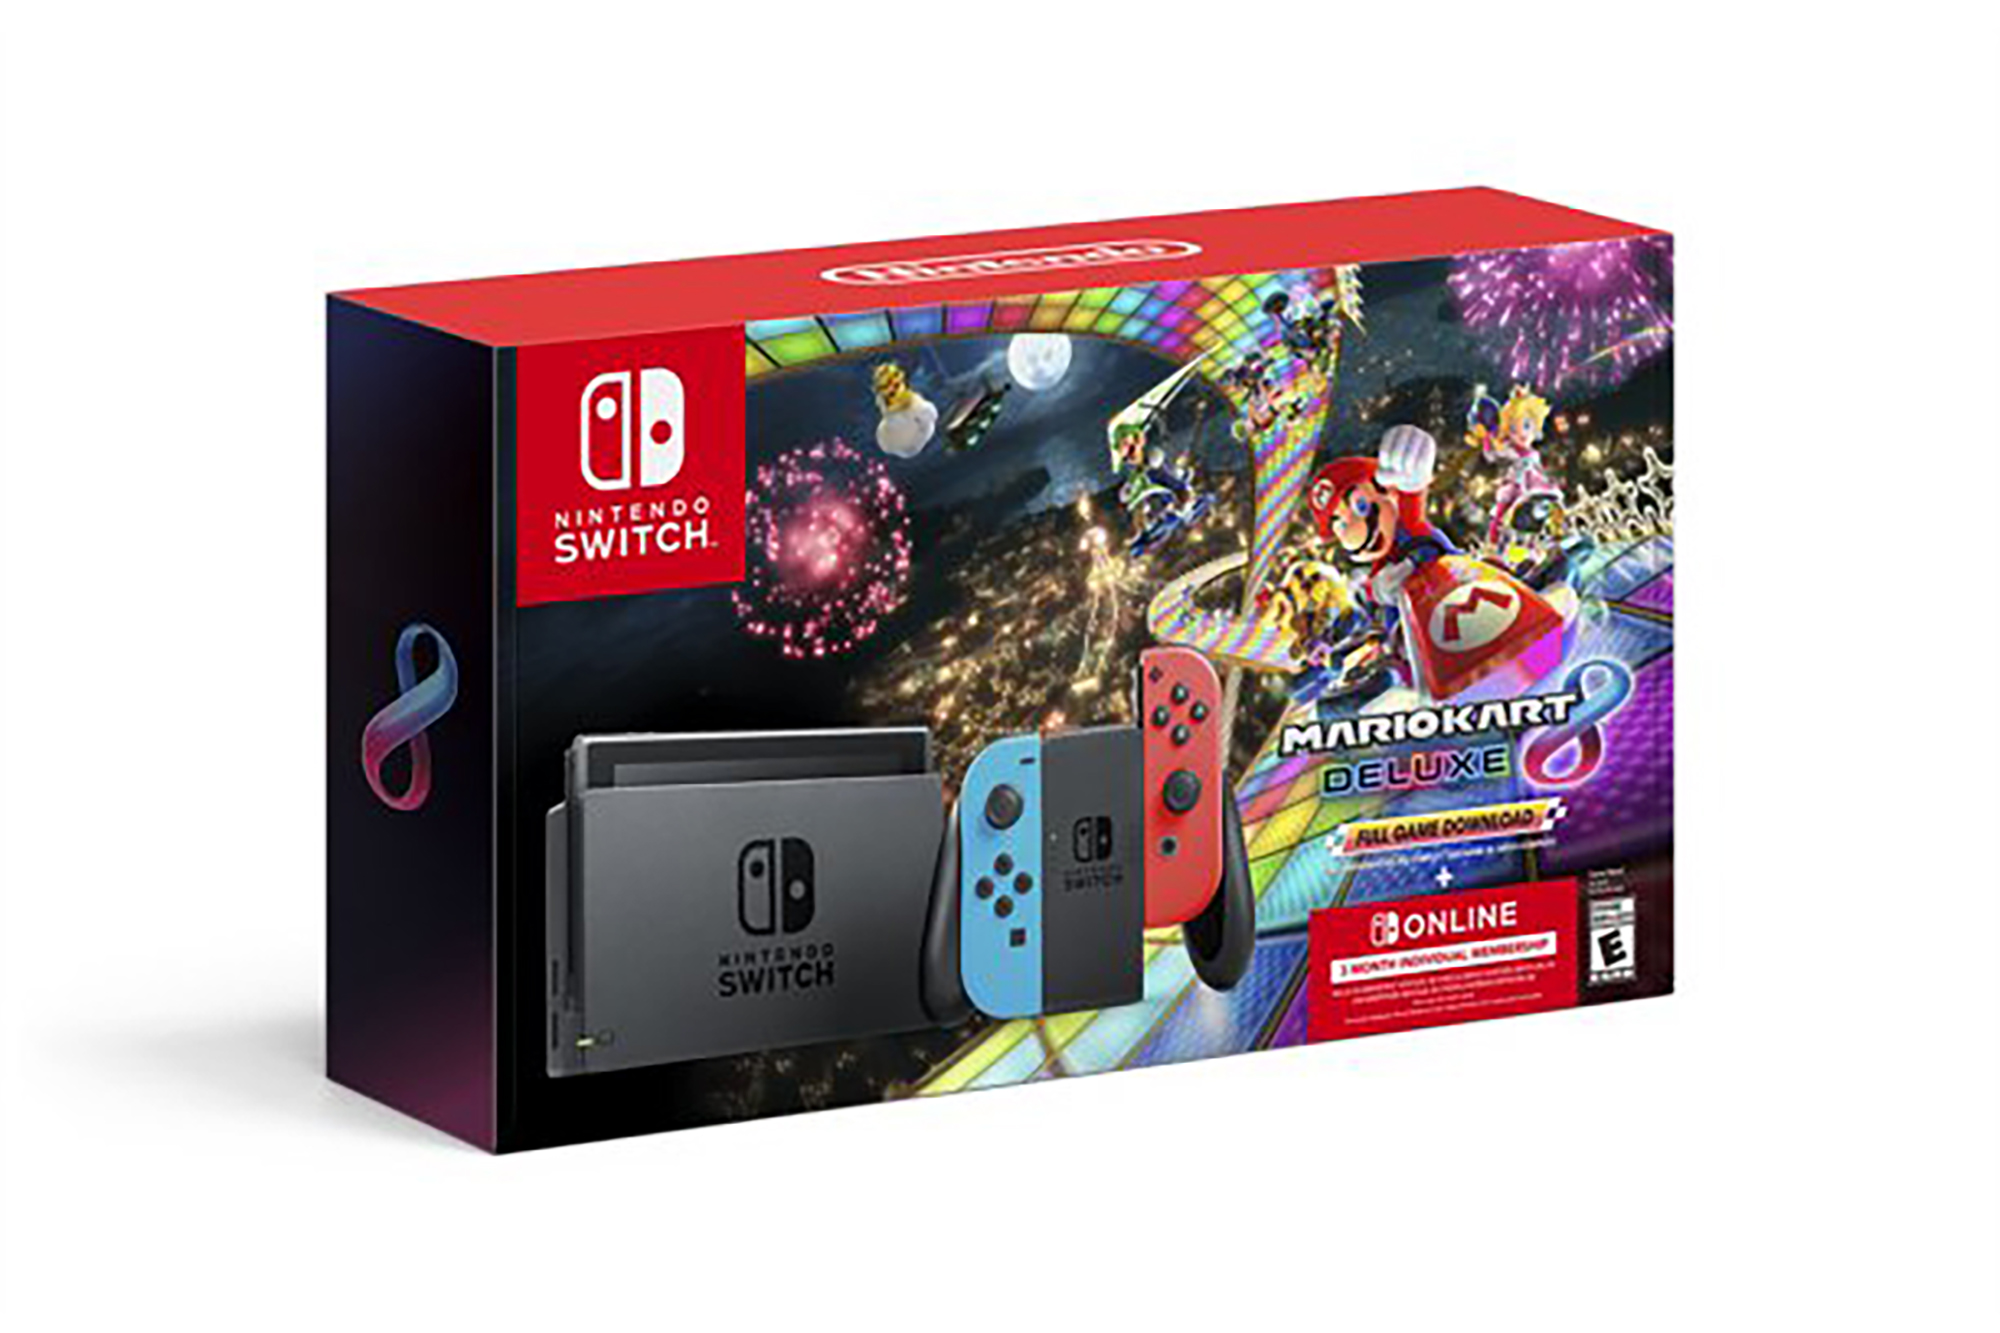 A Nintendo Switch and Mario Kart 8 package 